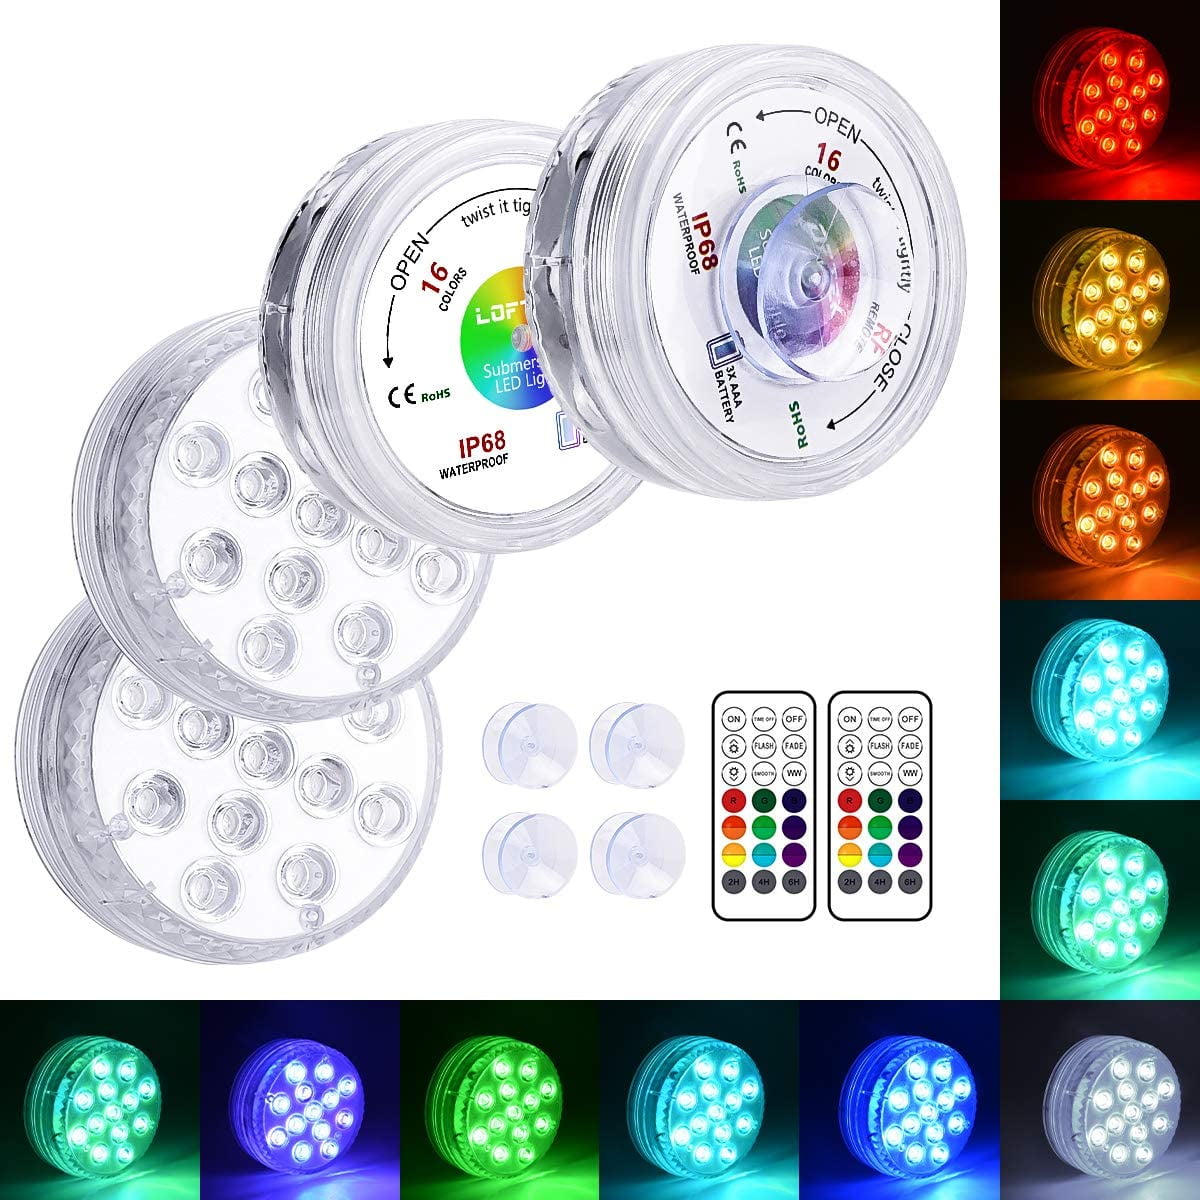 Waterproof LED Puck Light Remote Controlled Coaster Multi-color Cub Light  Used for Swimming Pool Lighting and Center Pieces